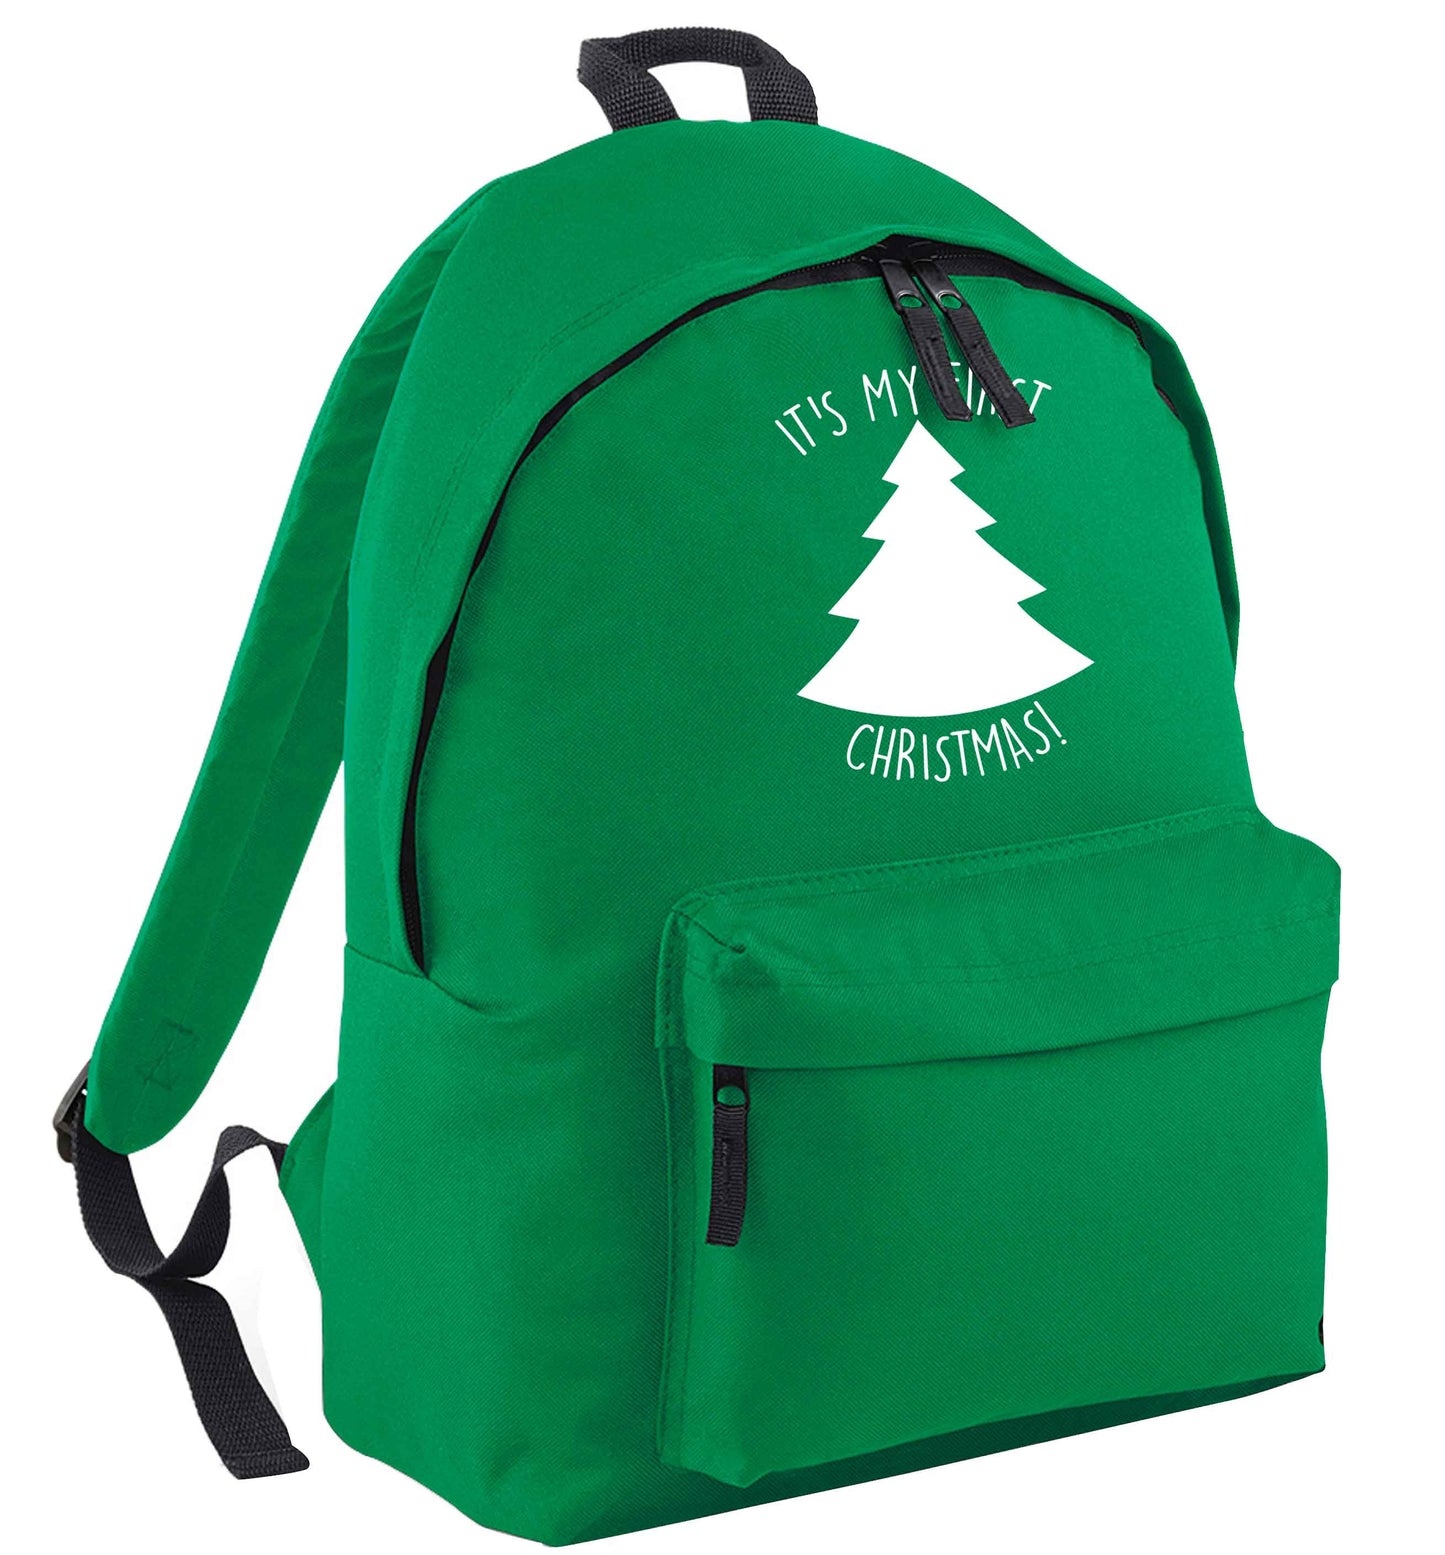 It's my first Christmas - tree green adults backpack